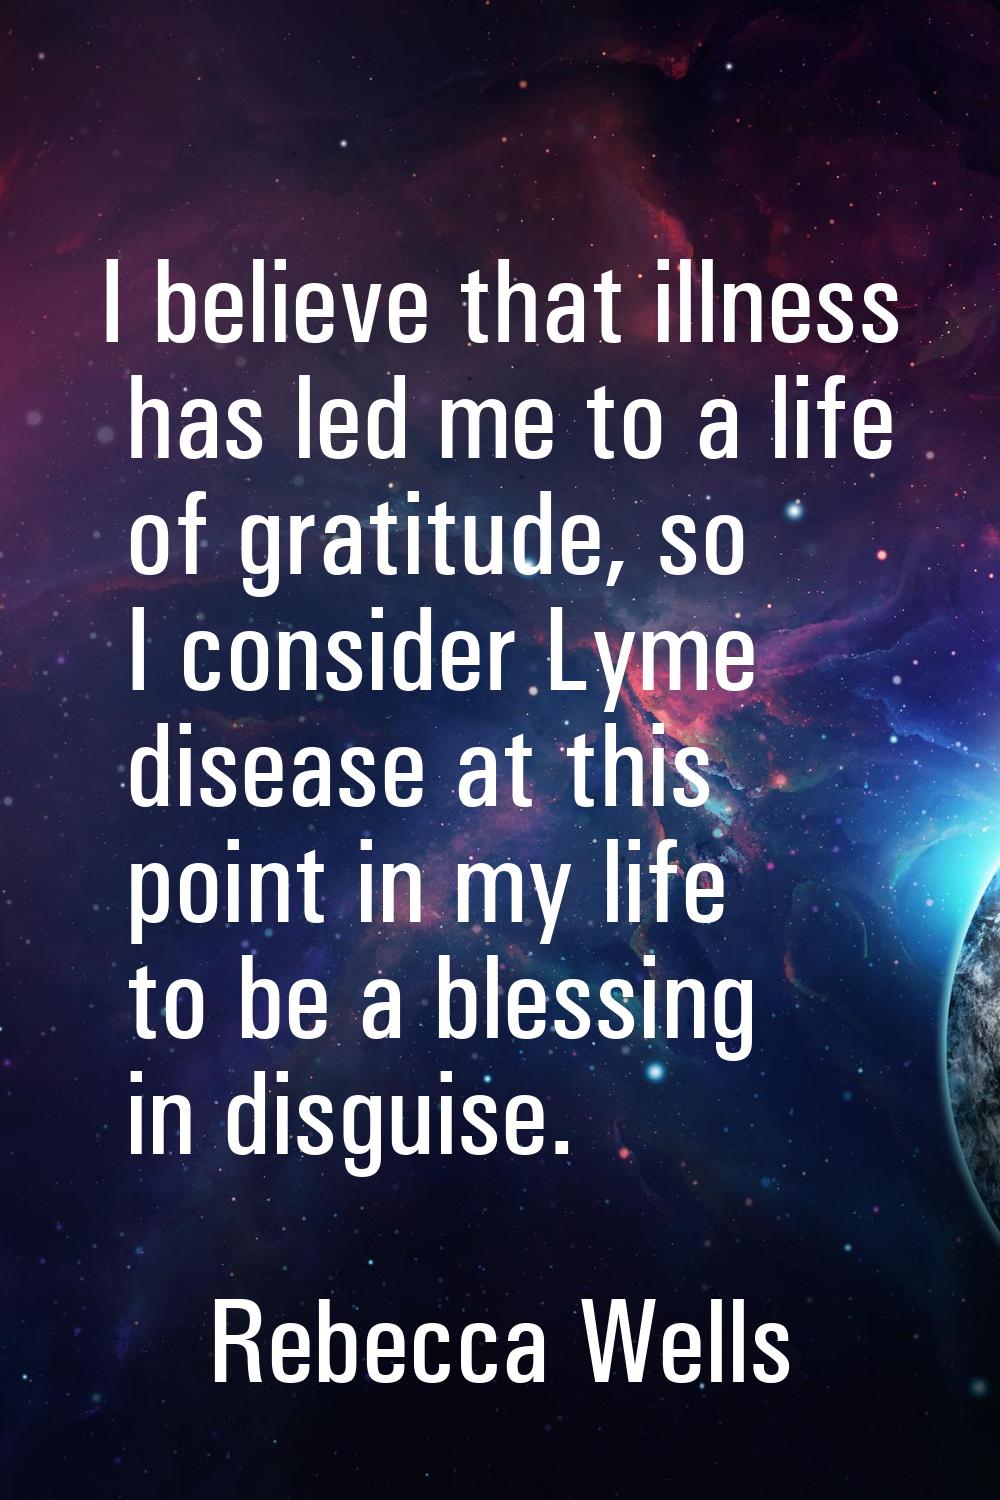 I believe that illness has led me to a life of gratitude, so I consider Lyme disease at this point 